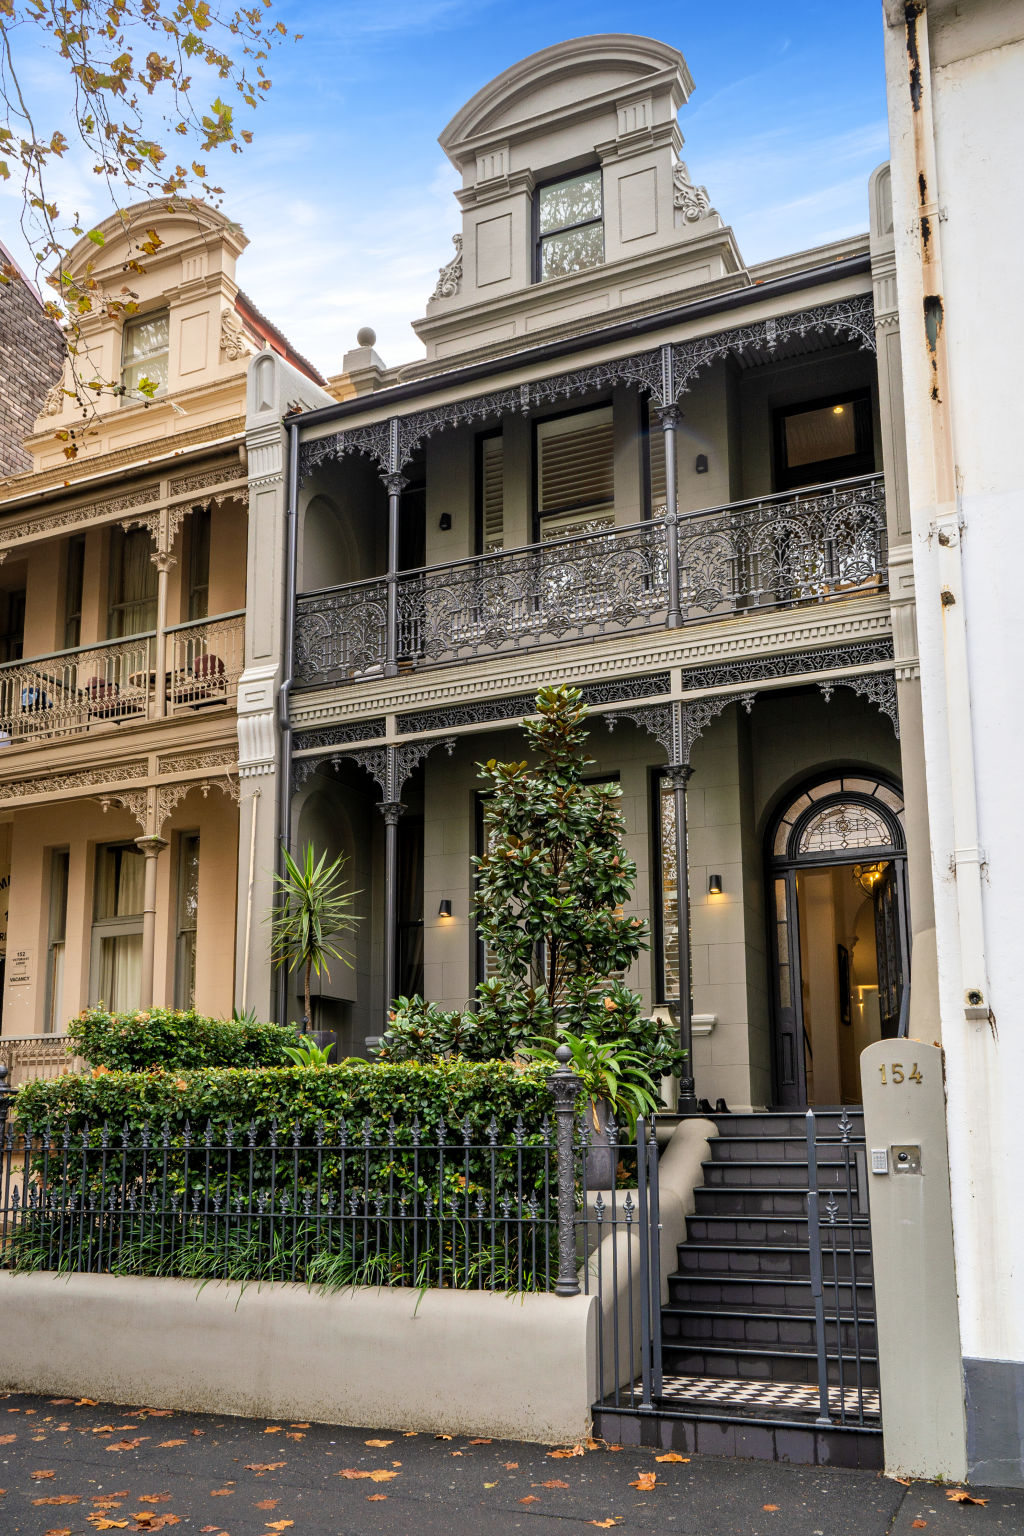 London calling: Inner Sydney starts to attract big prices for single terrace houses